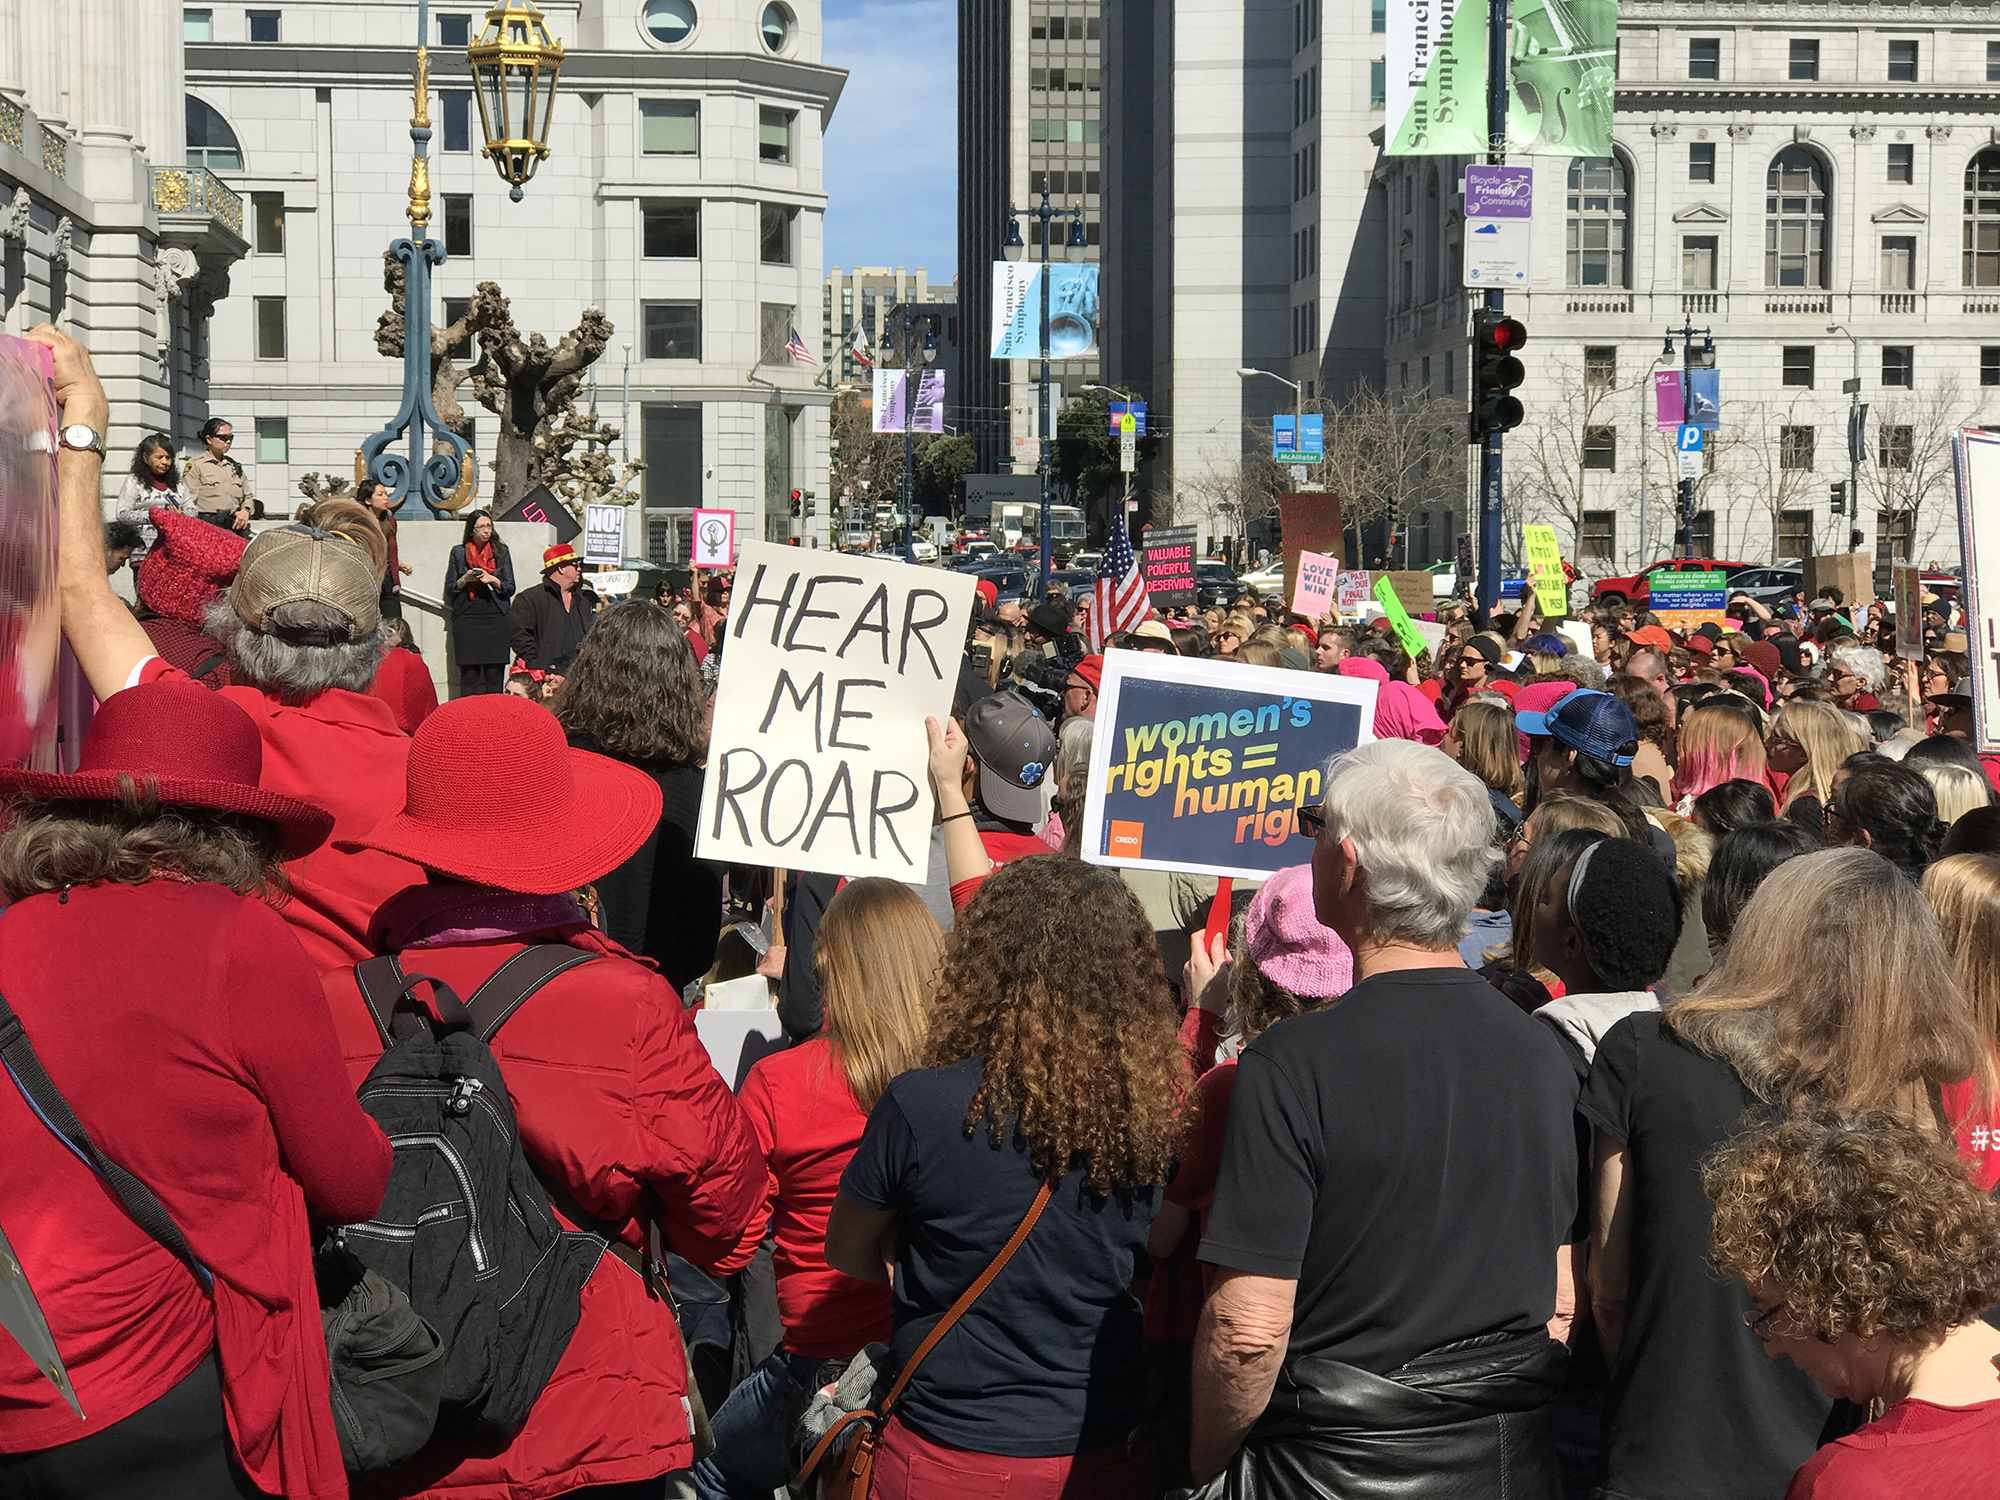 International Women's Day rally in San Francisco, one person holds a sing reading "Hear Me Roar" and another sign reads "Women's rights equals human rights."